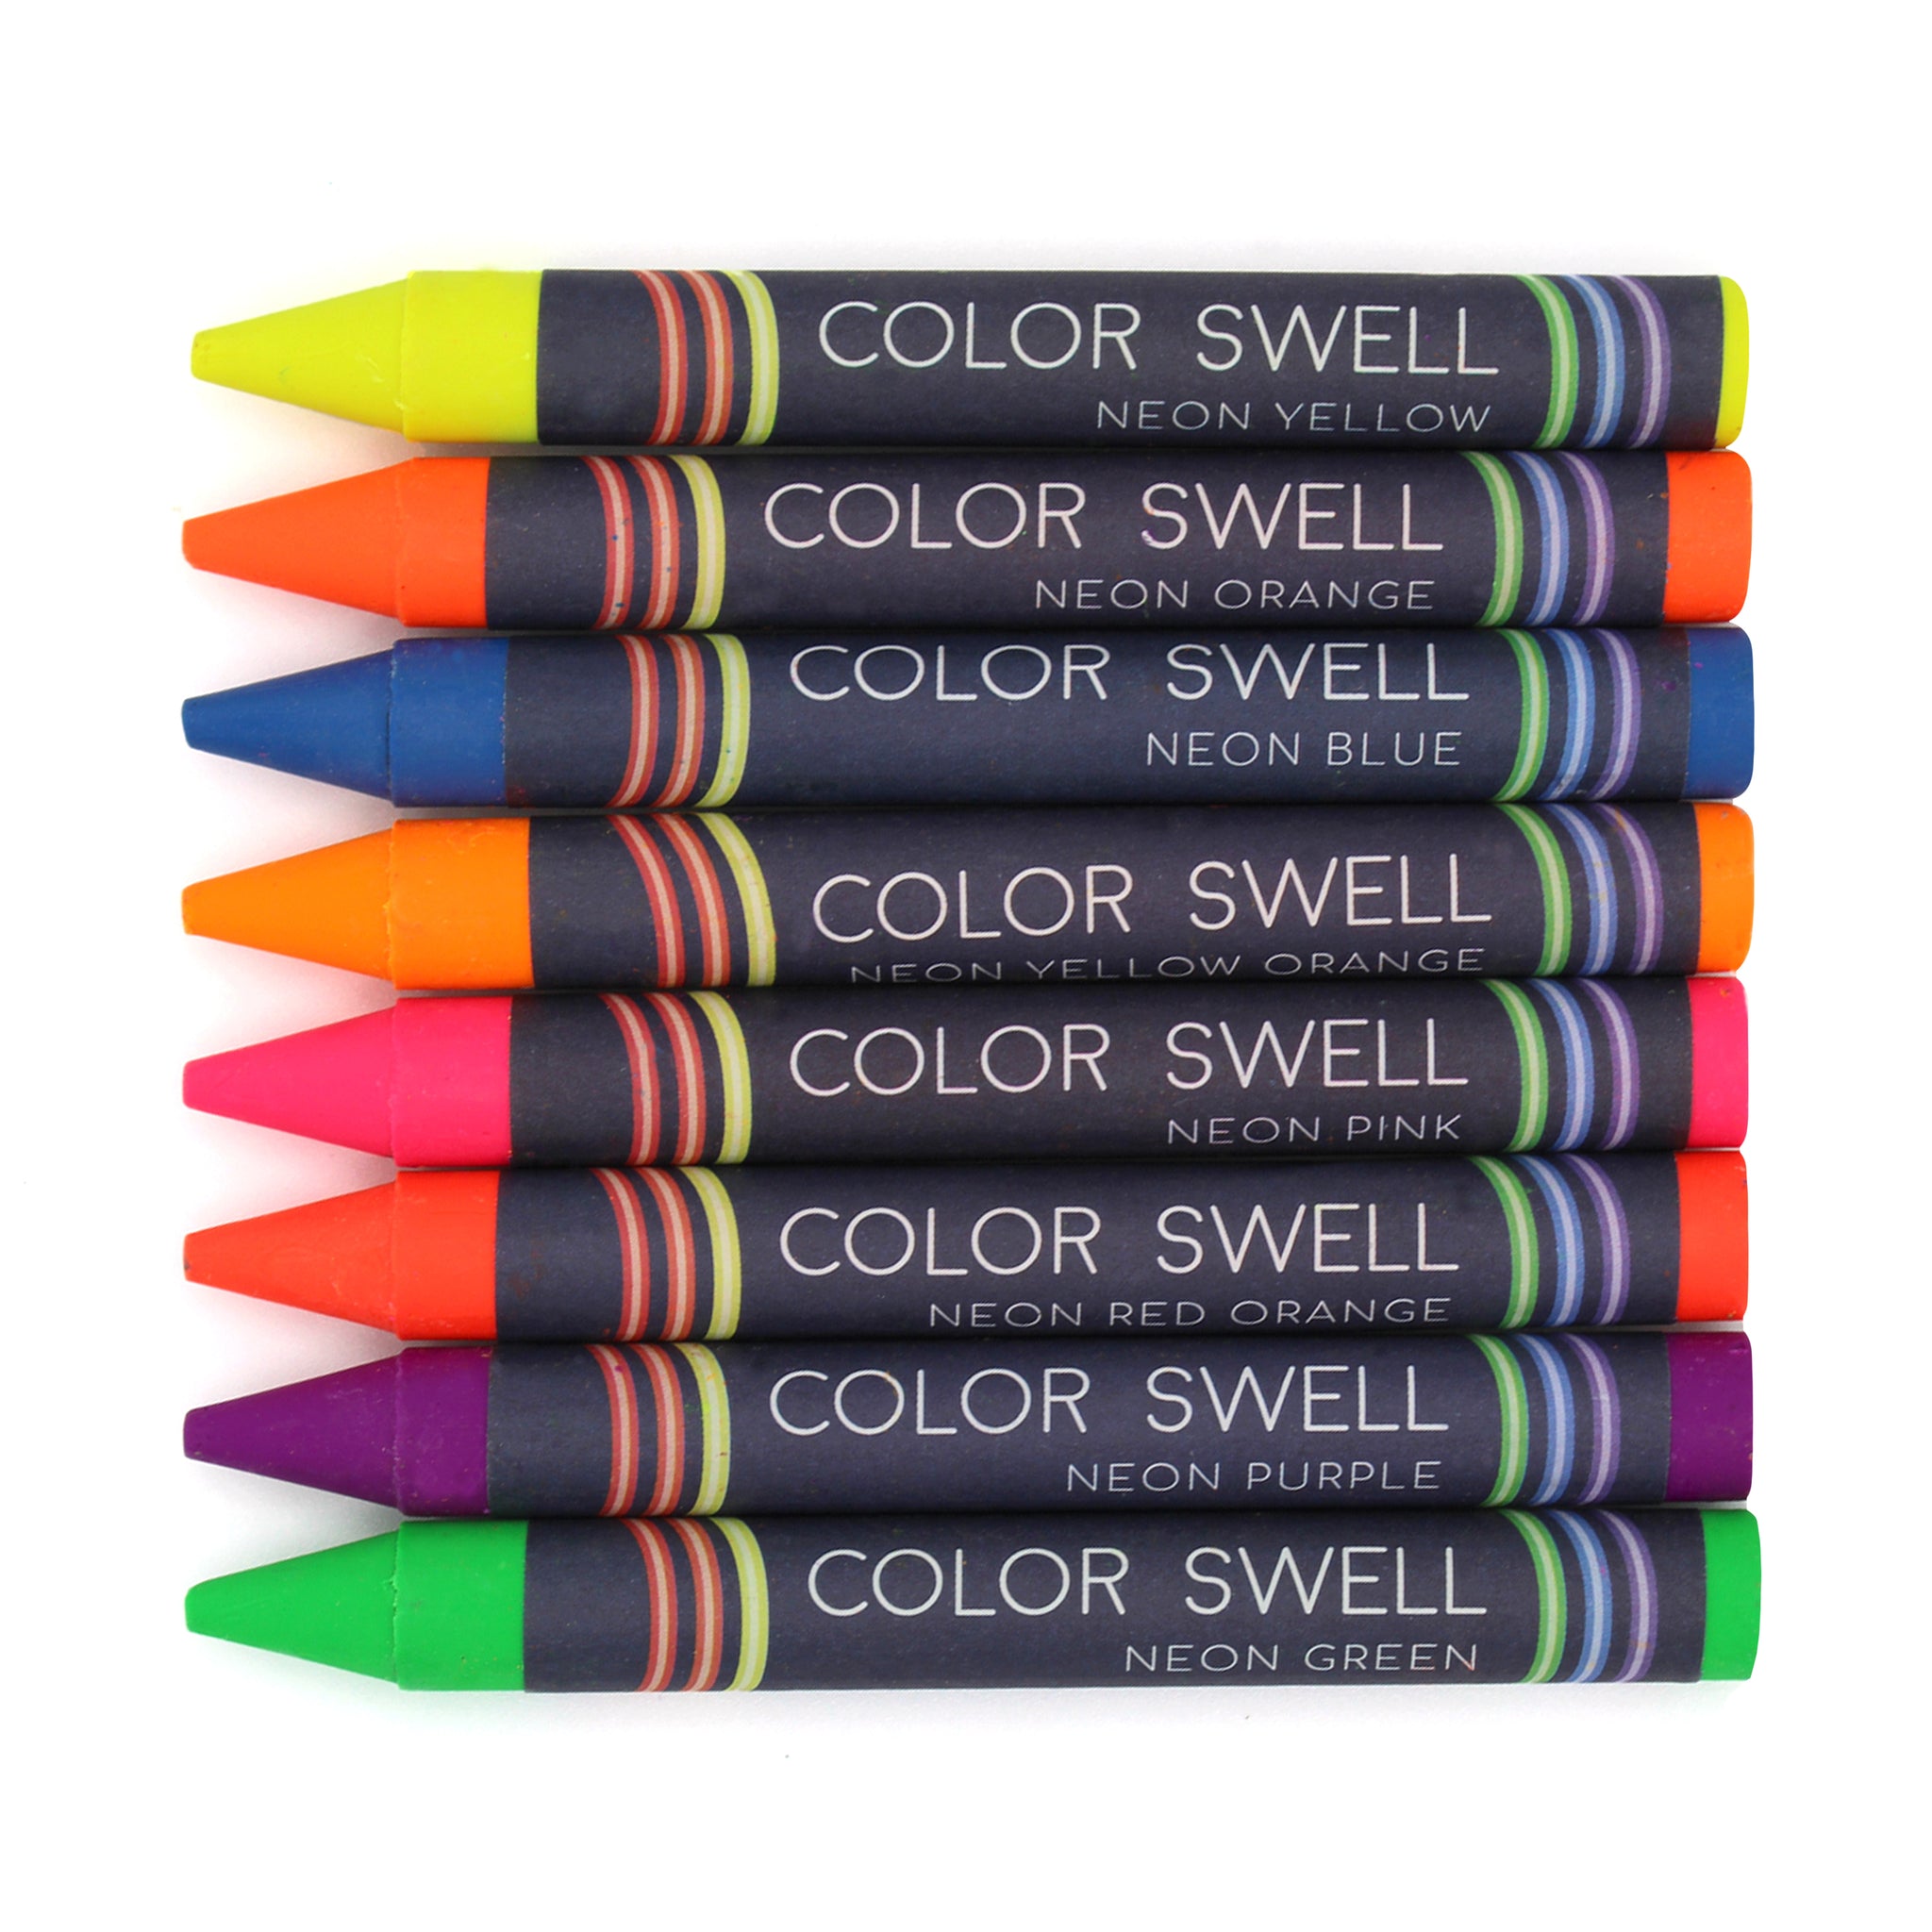 Color Swell Bulk Crayon Classpack - 1680 Crayons in 24 Vibrant Colors of Teacher Quality Durable Bulk Crayons for Classroom and Home